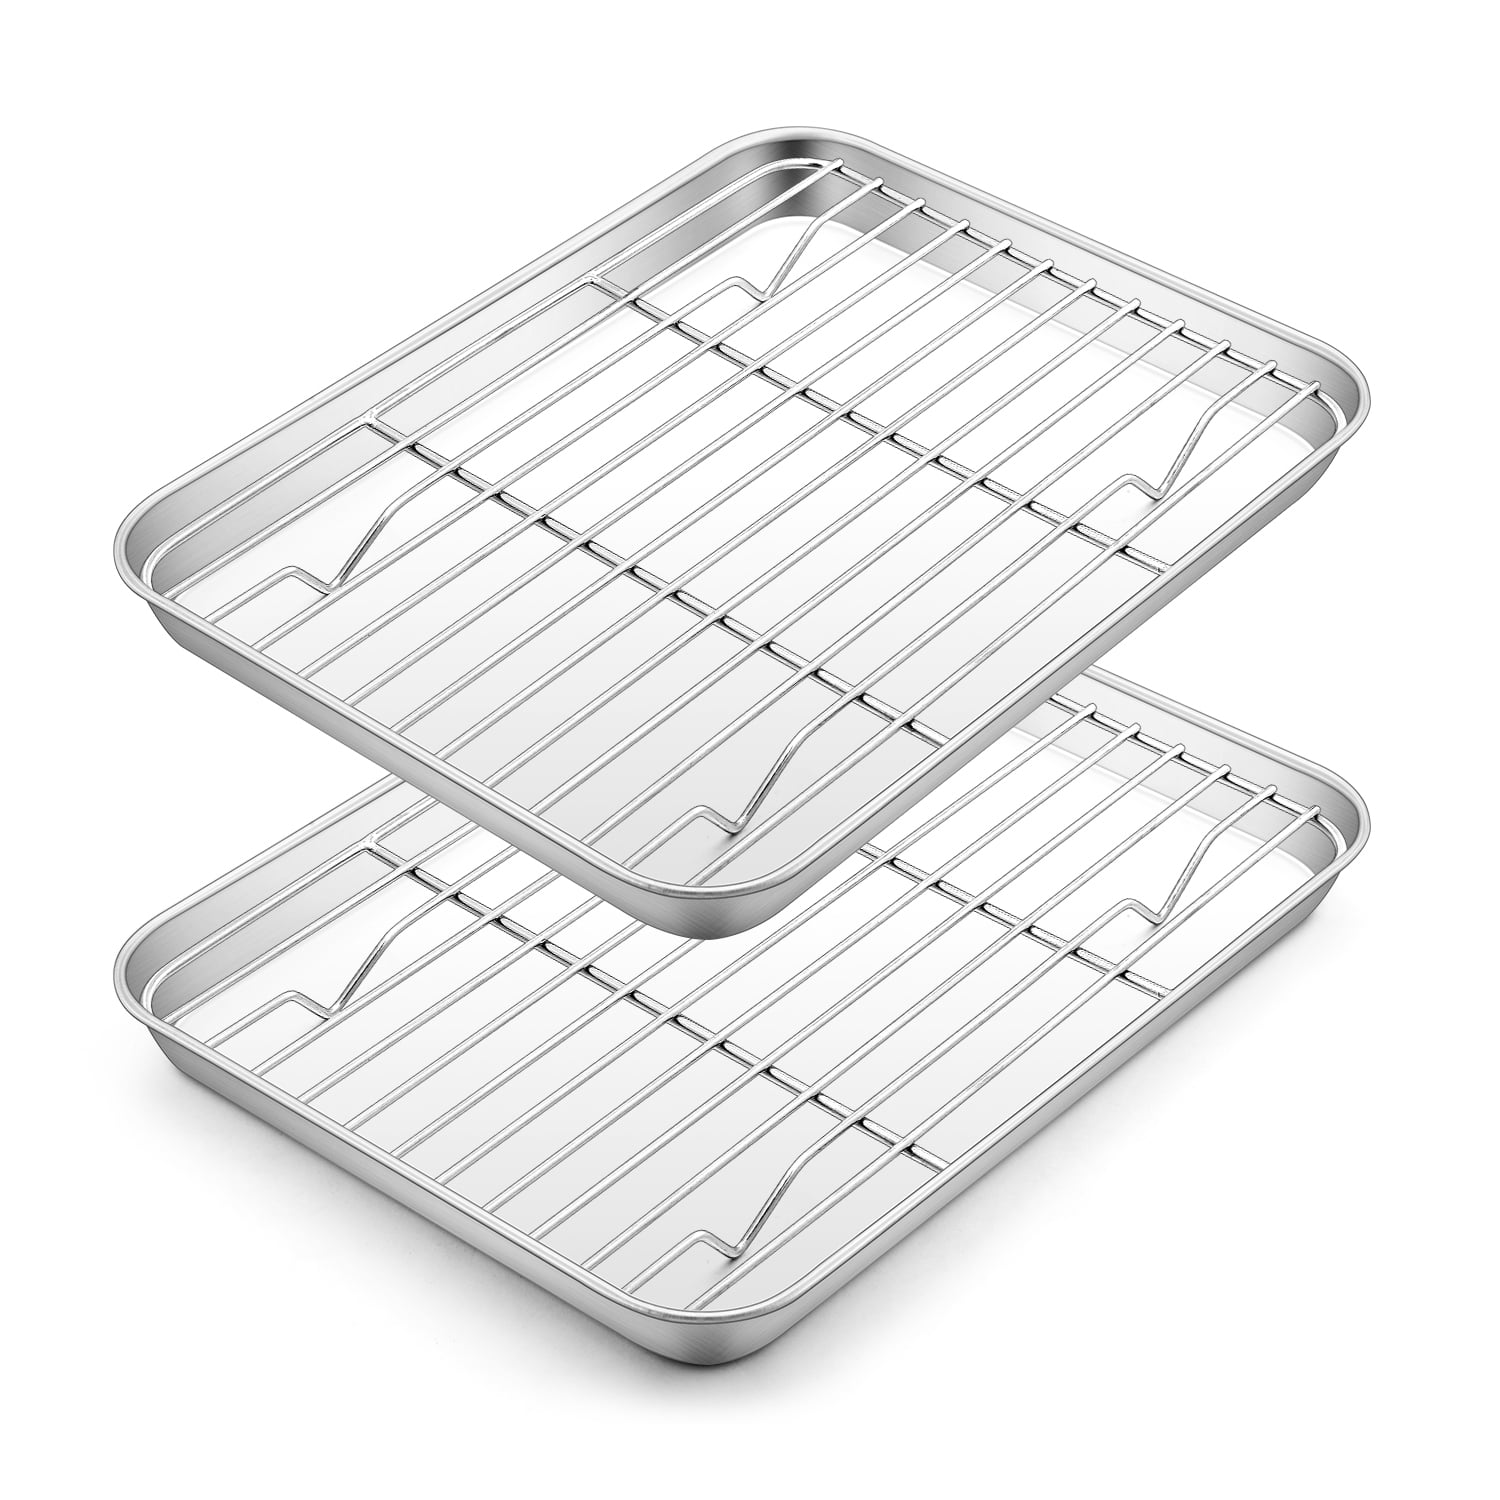  ROTTAY Baking Sheet with Rack Set (2 Pans + 2 Racks), Stainless  Steel Cookie Sheet with Cooling Rack, Nonstick Baking Pan, Warp Resistant &  Heavy Duty & Rust Free, Size 16